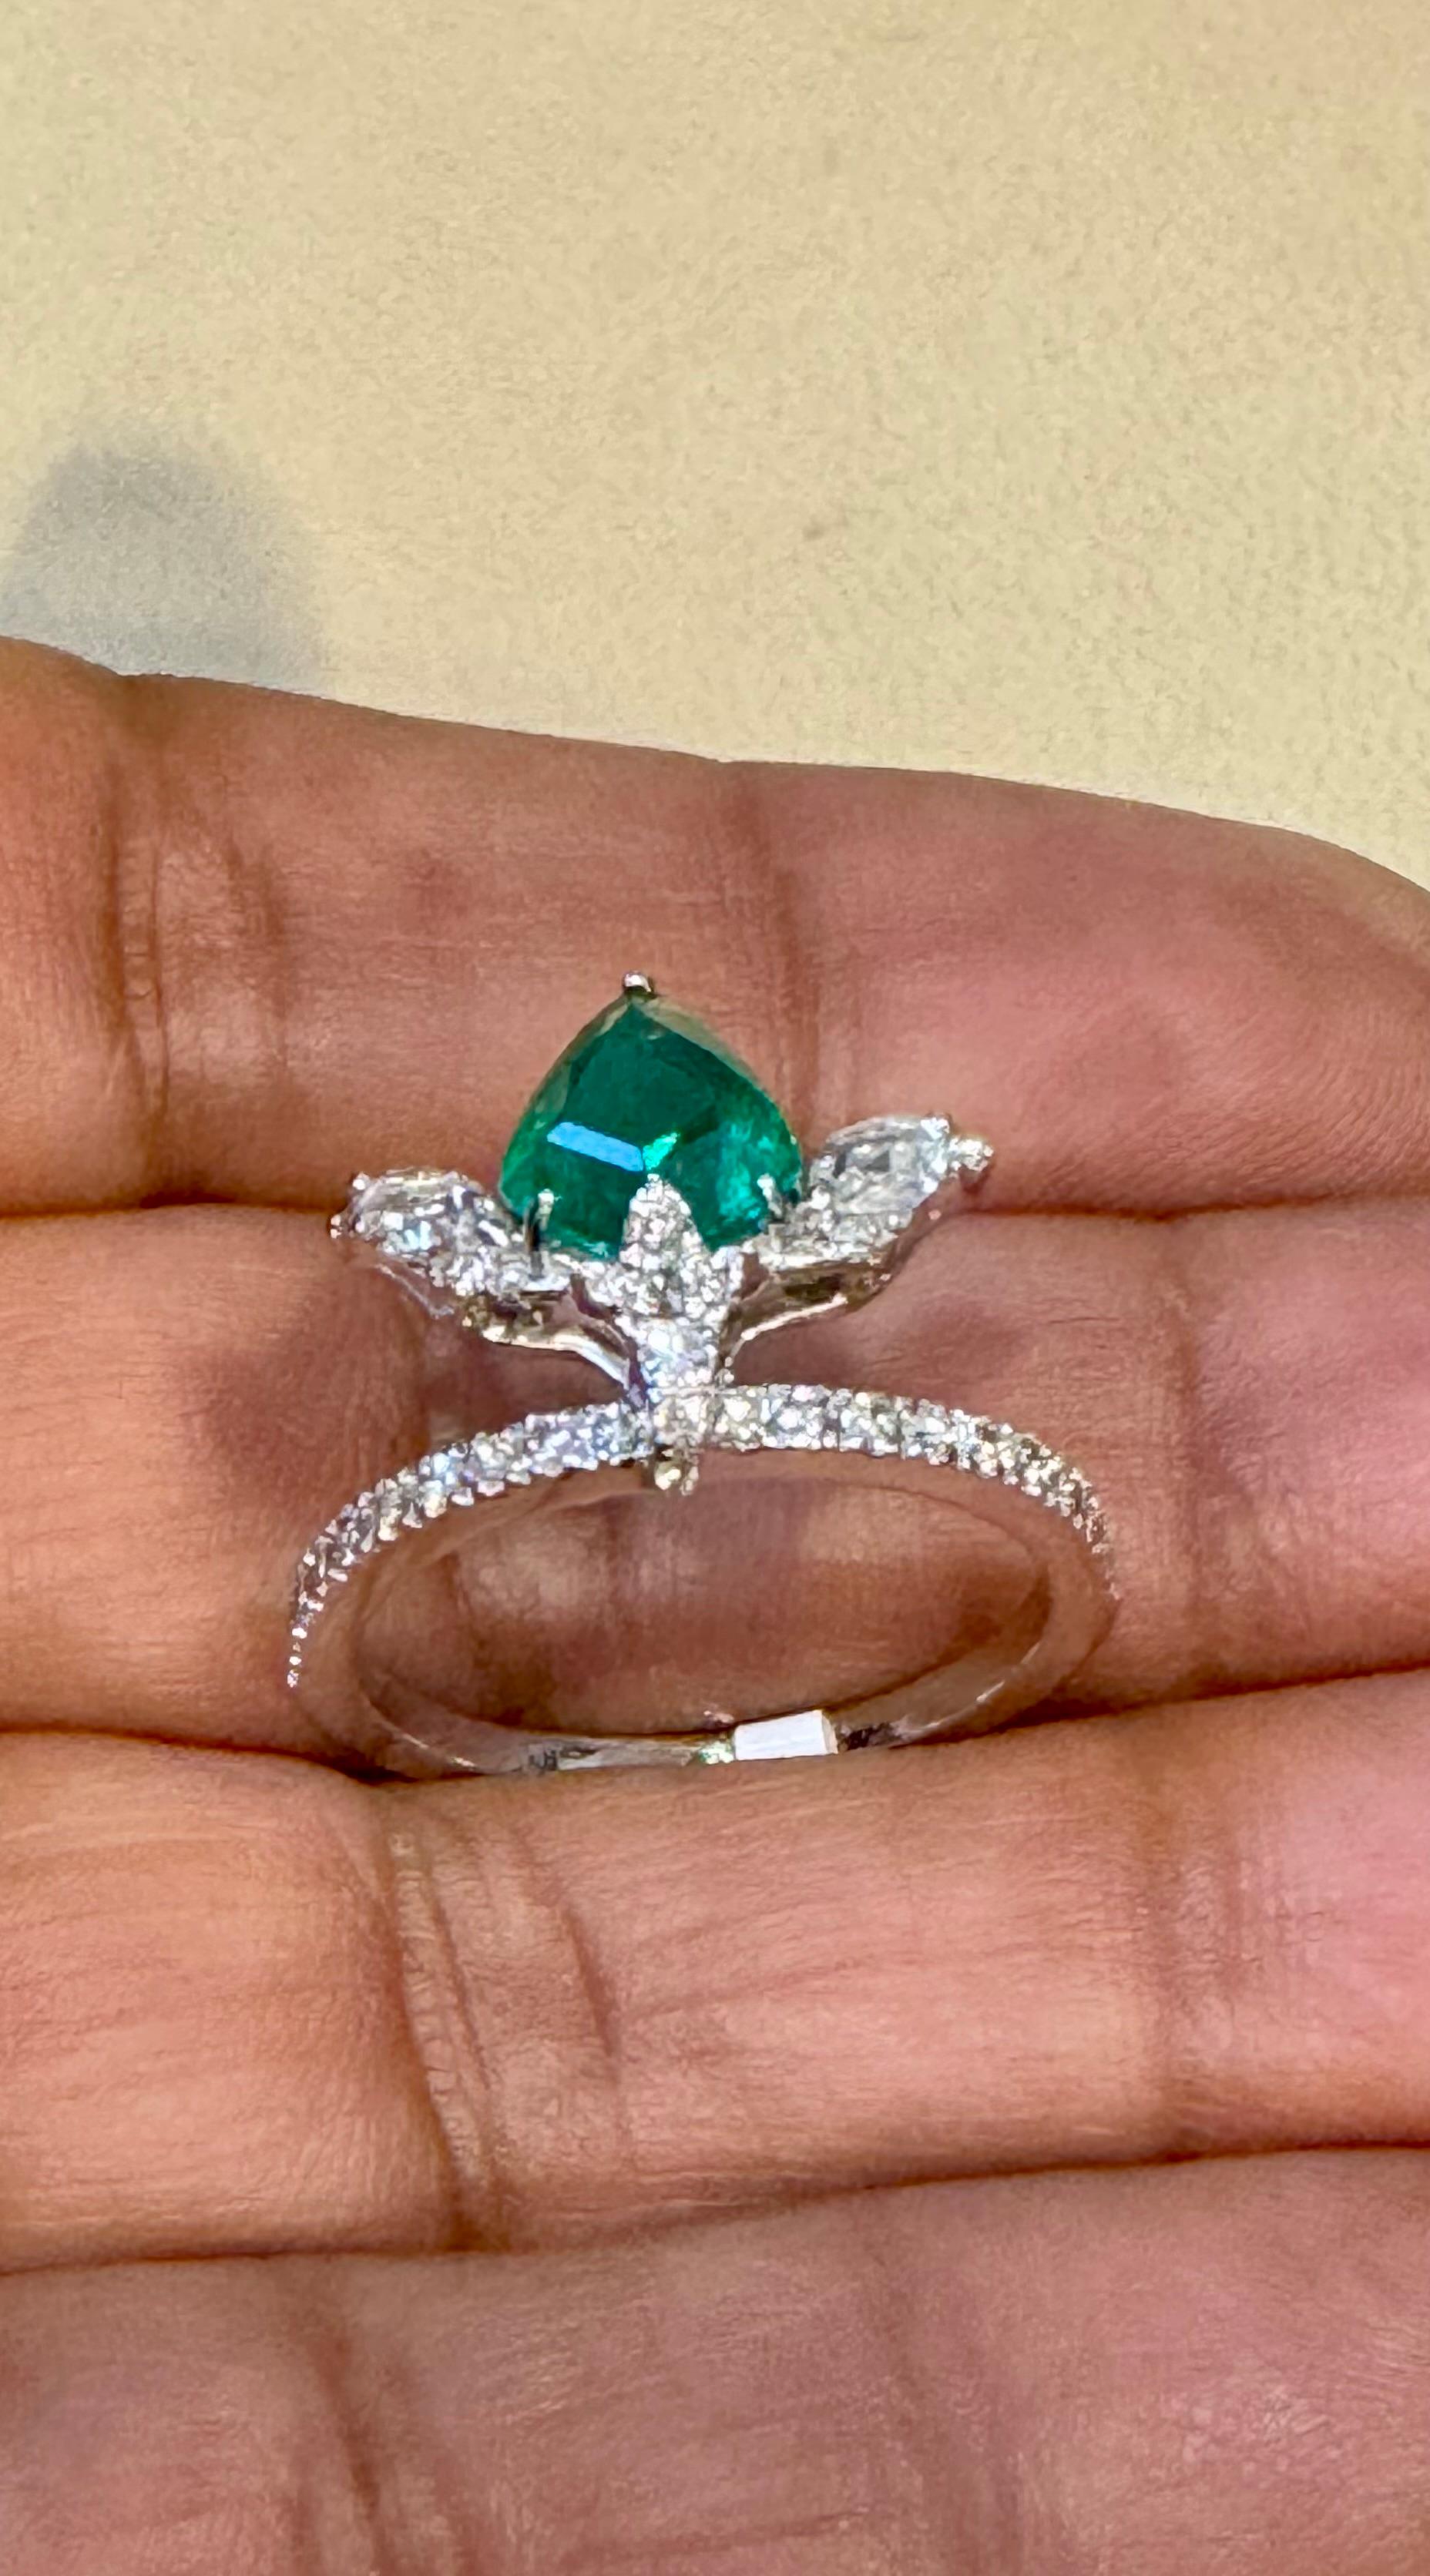 1.2 Ct Finest Zambian Pear Emerald & 1 Ct Diamond Ring in 18 Kt Gold Size 6.5 For Sale 5